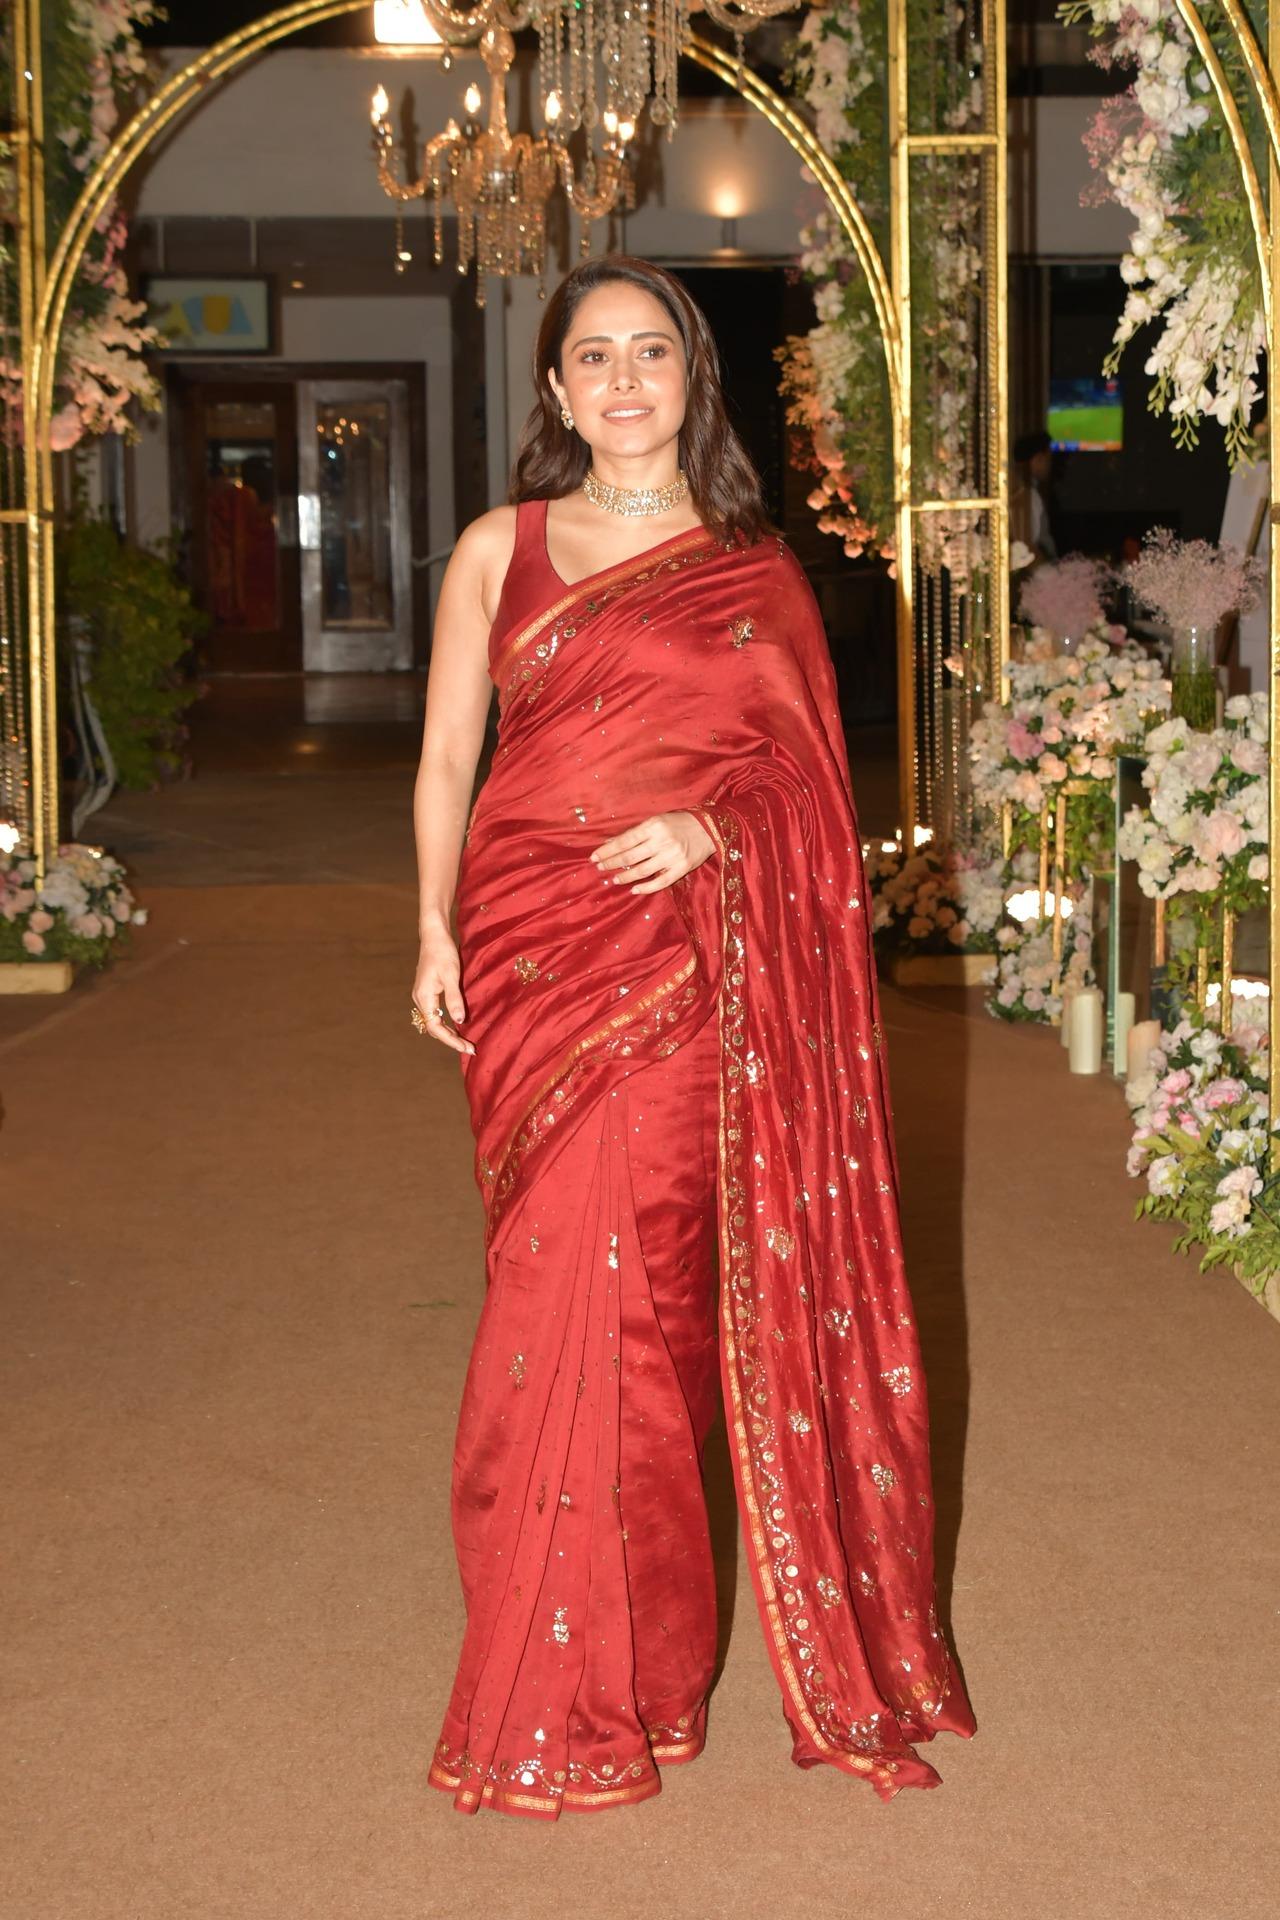 Nushrratt Bharuccha wore a red saree with golden embroidery. The actress paired it with a stylish intricate necklace and small stud earrings to finish her look